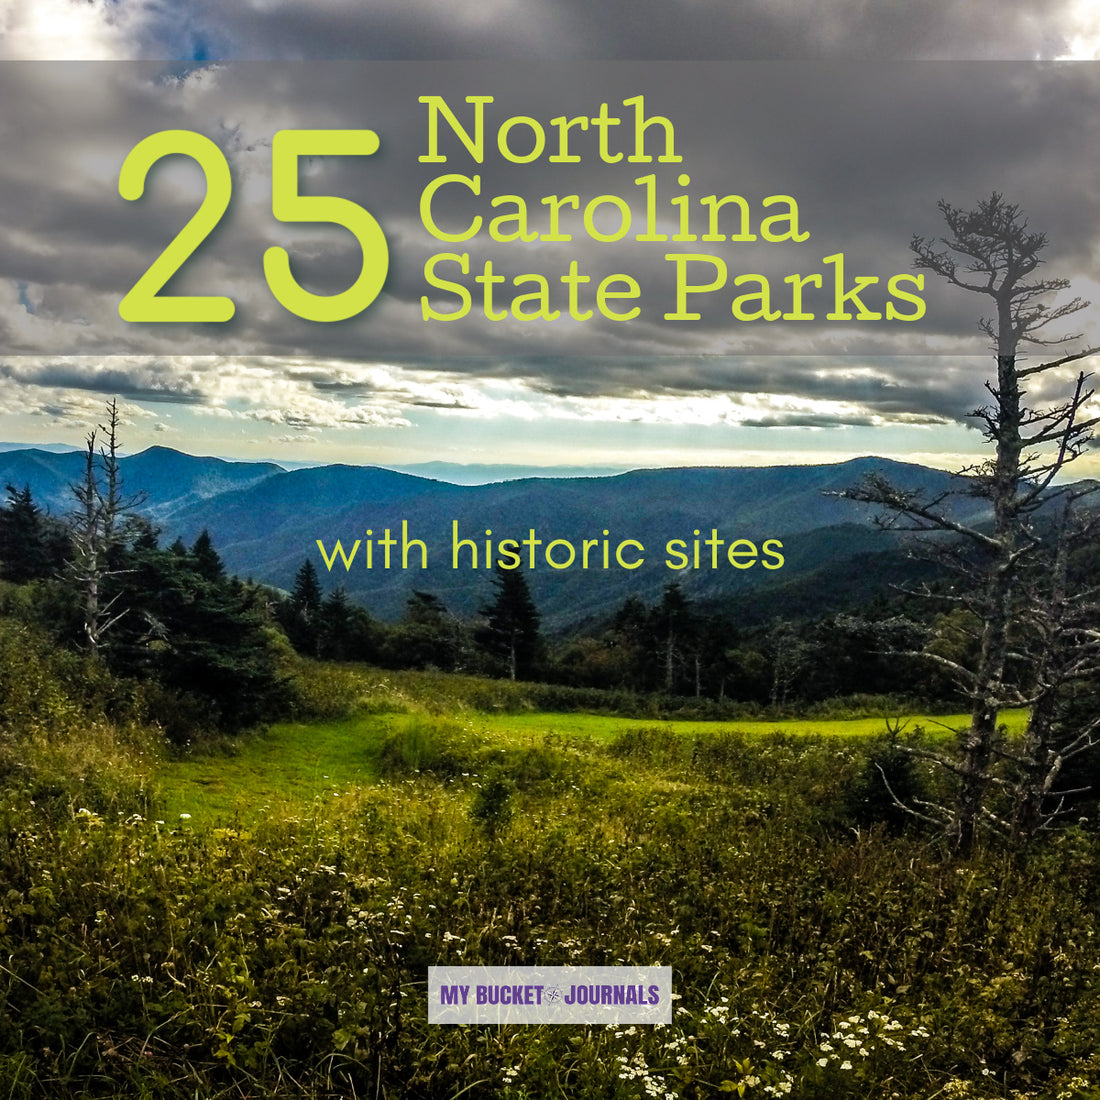 History and Nature Come Together in North Carolina State Parks